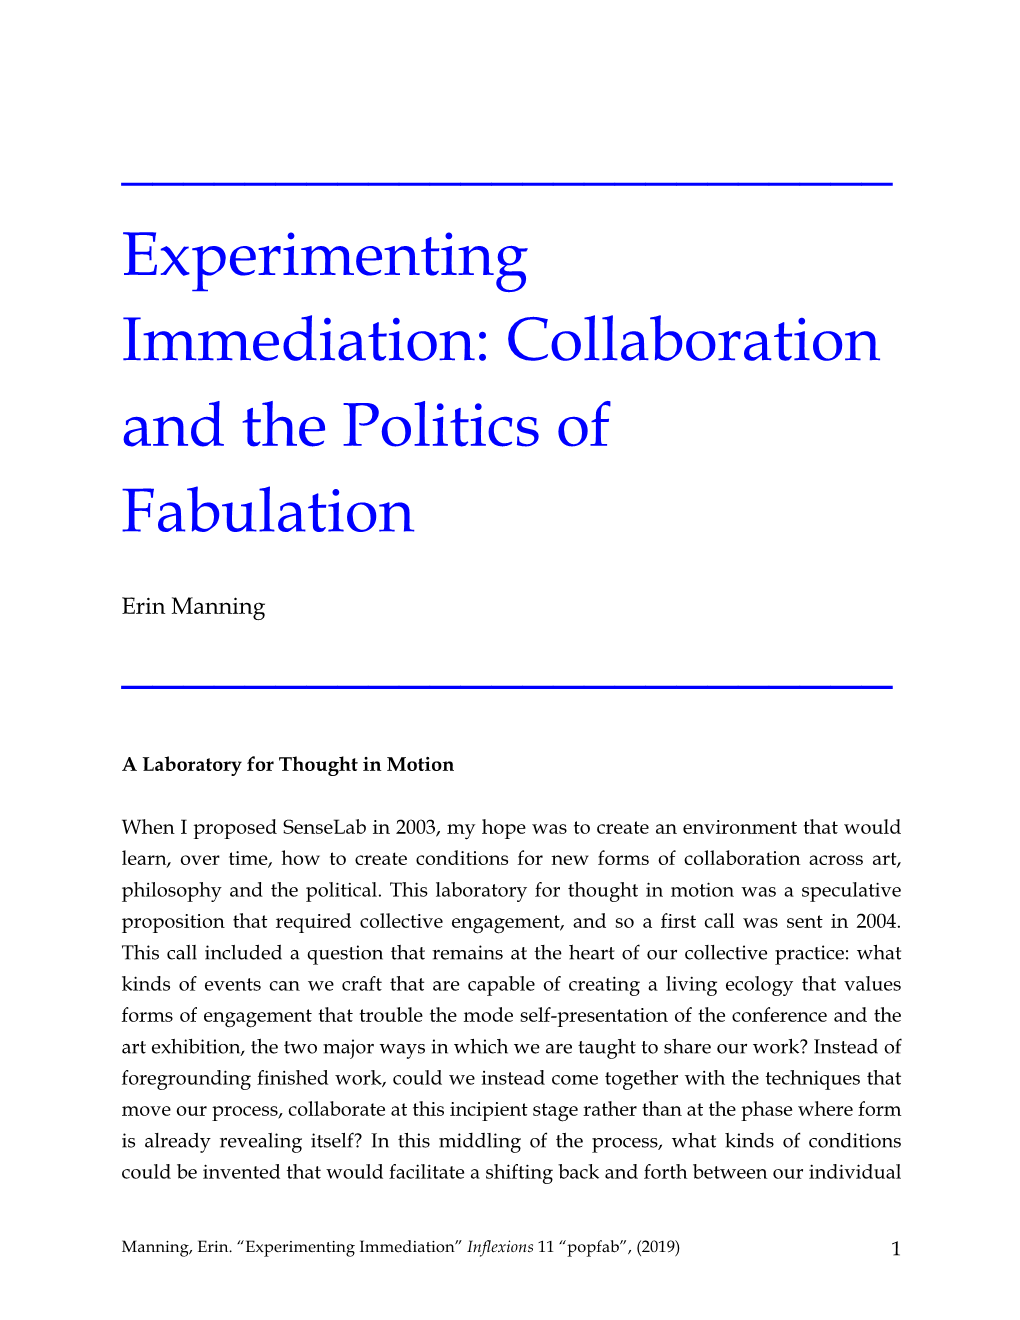 Experimenting Immediation: Collaboration and the Politics of Fabulation